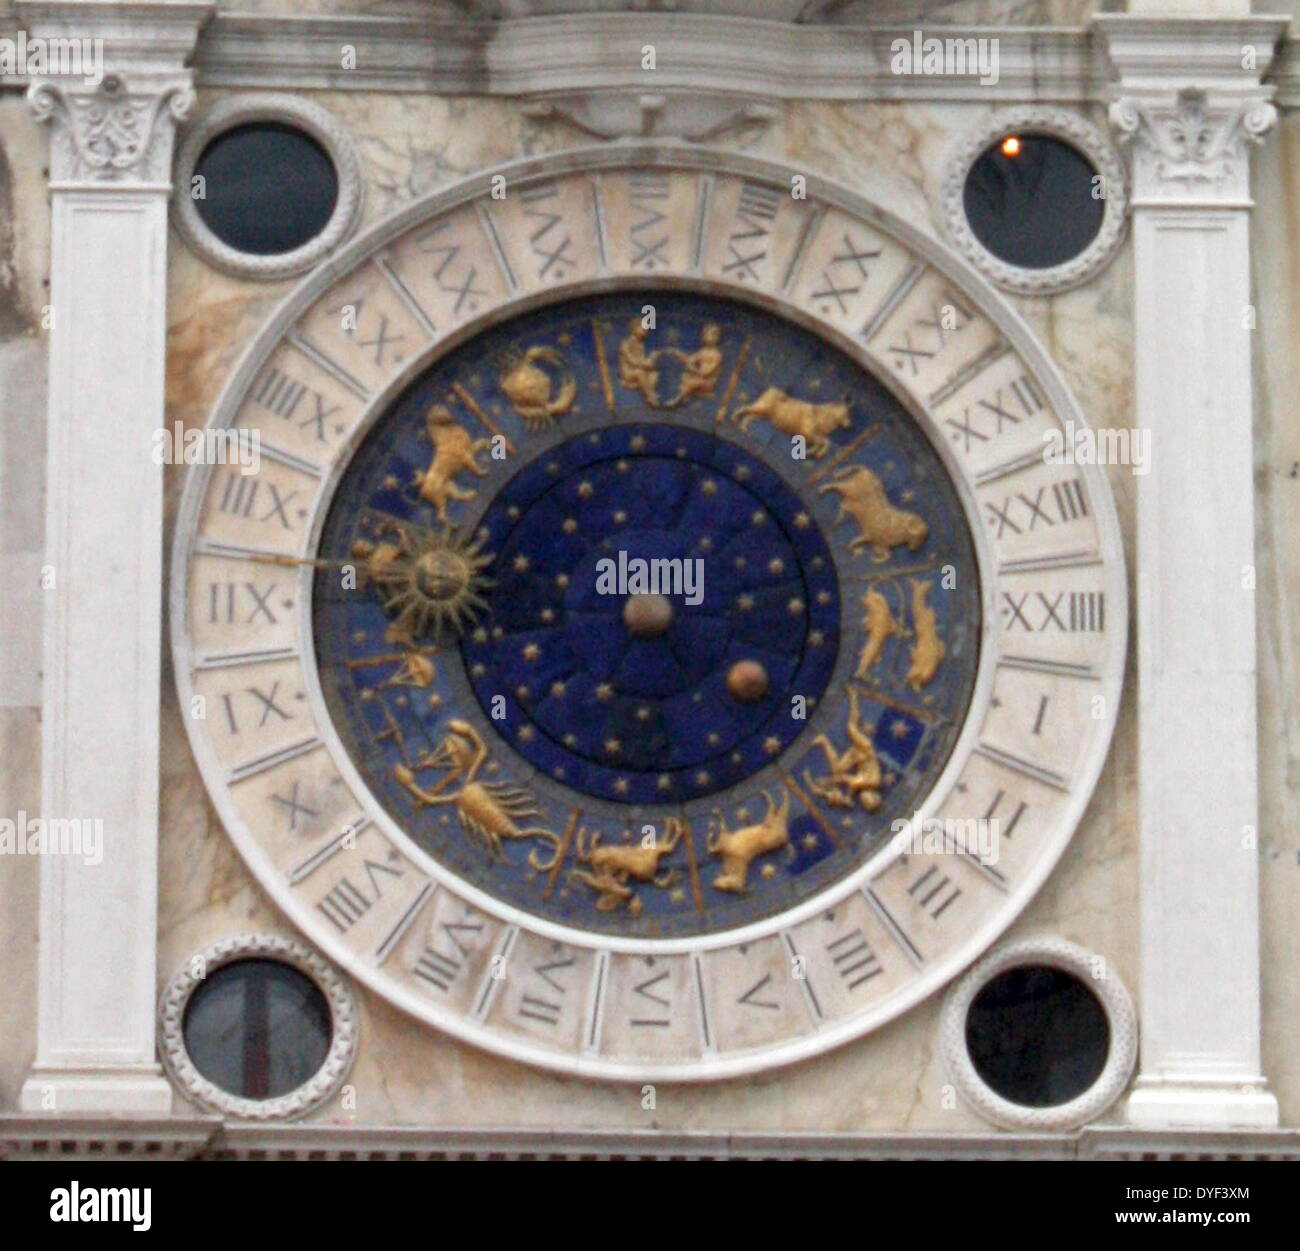 The Clockface of St Mark's Clocktower 2013. Blue and Gold clock face lined with the signs of the Zodiac and Roman Numerals. Stock Photo